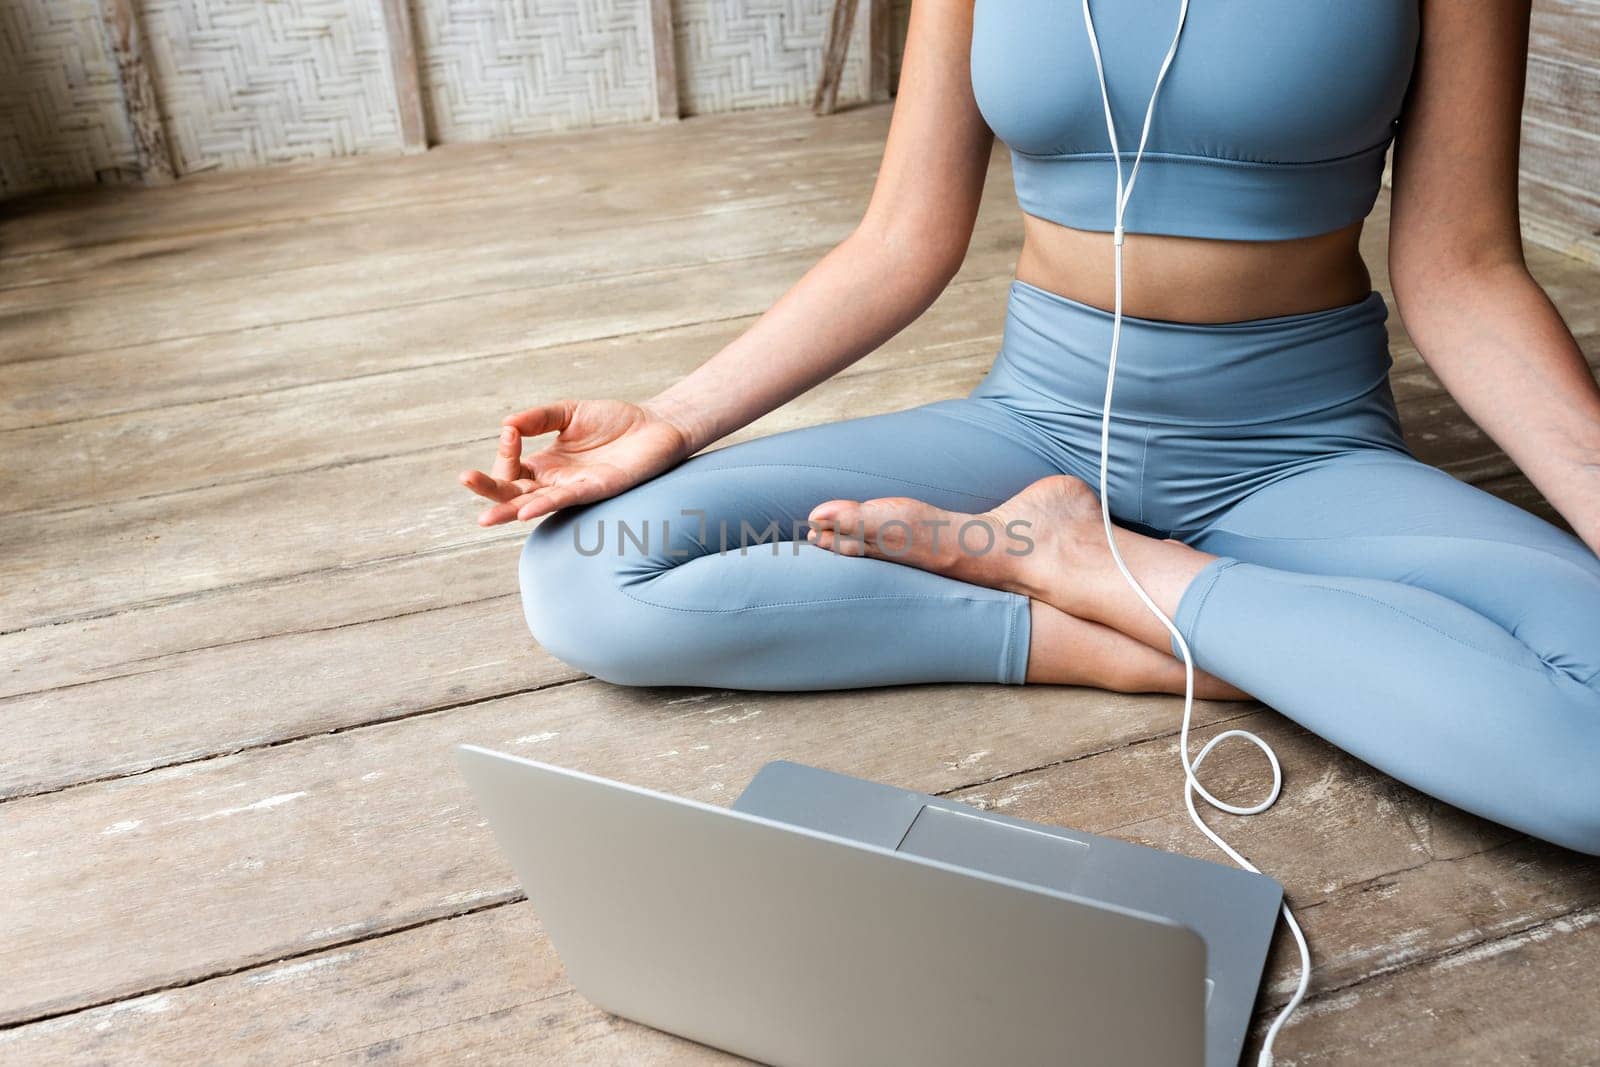 Unrecognisable woman wearing sports clothing doing online meditation using laptop and headphone sitting on wooden floor. Copy space. Spirituality, mental health and technology concepts.